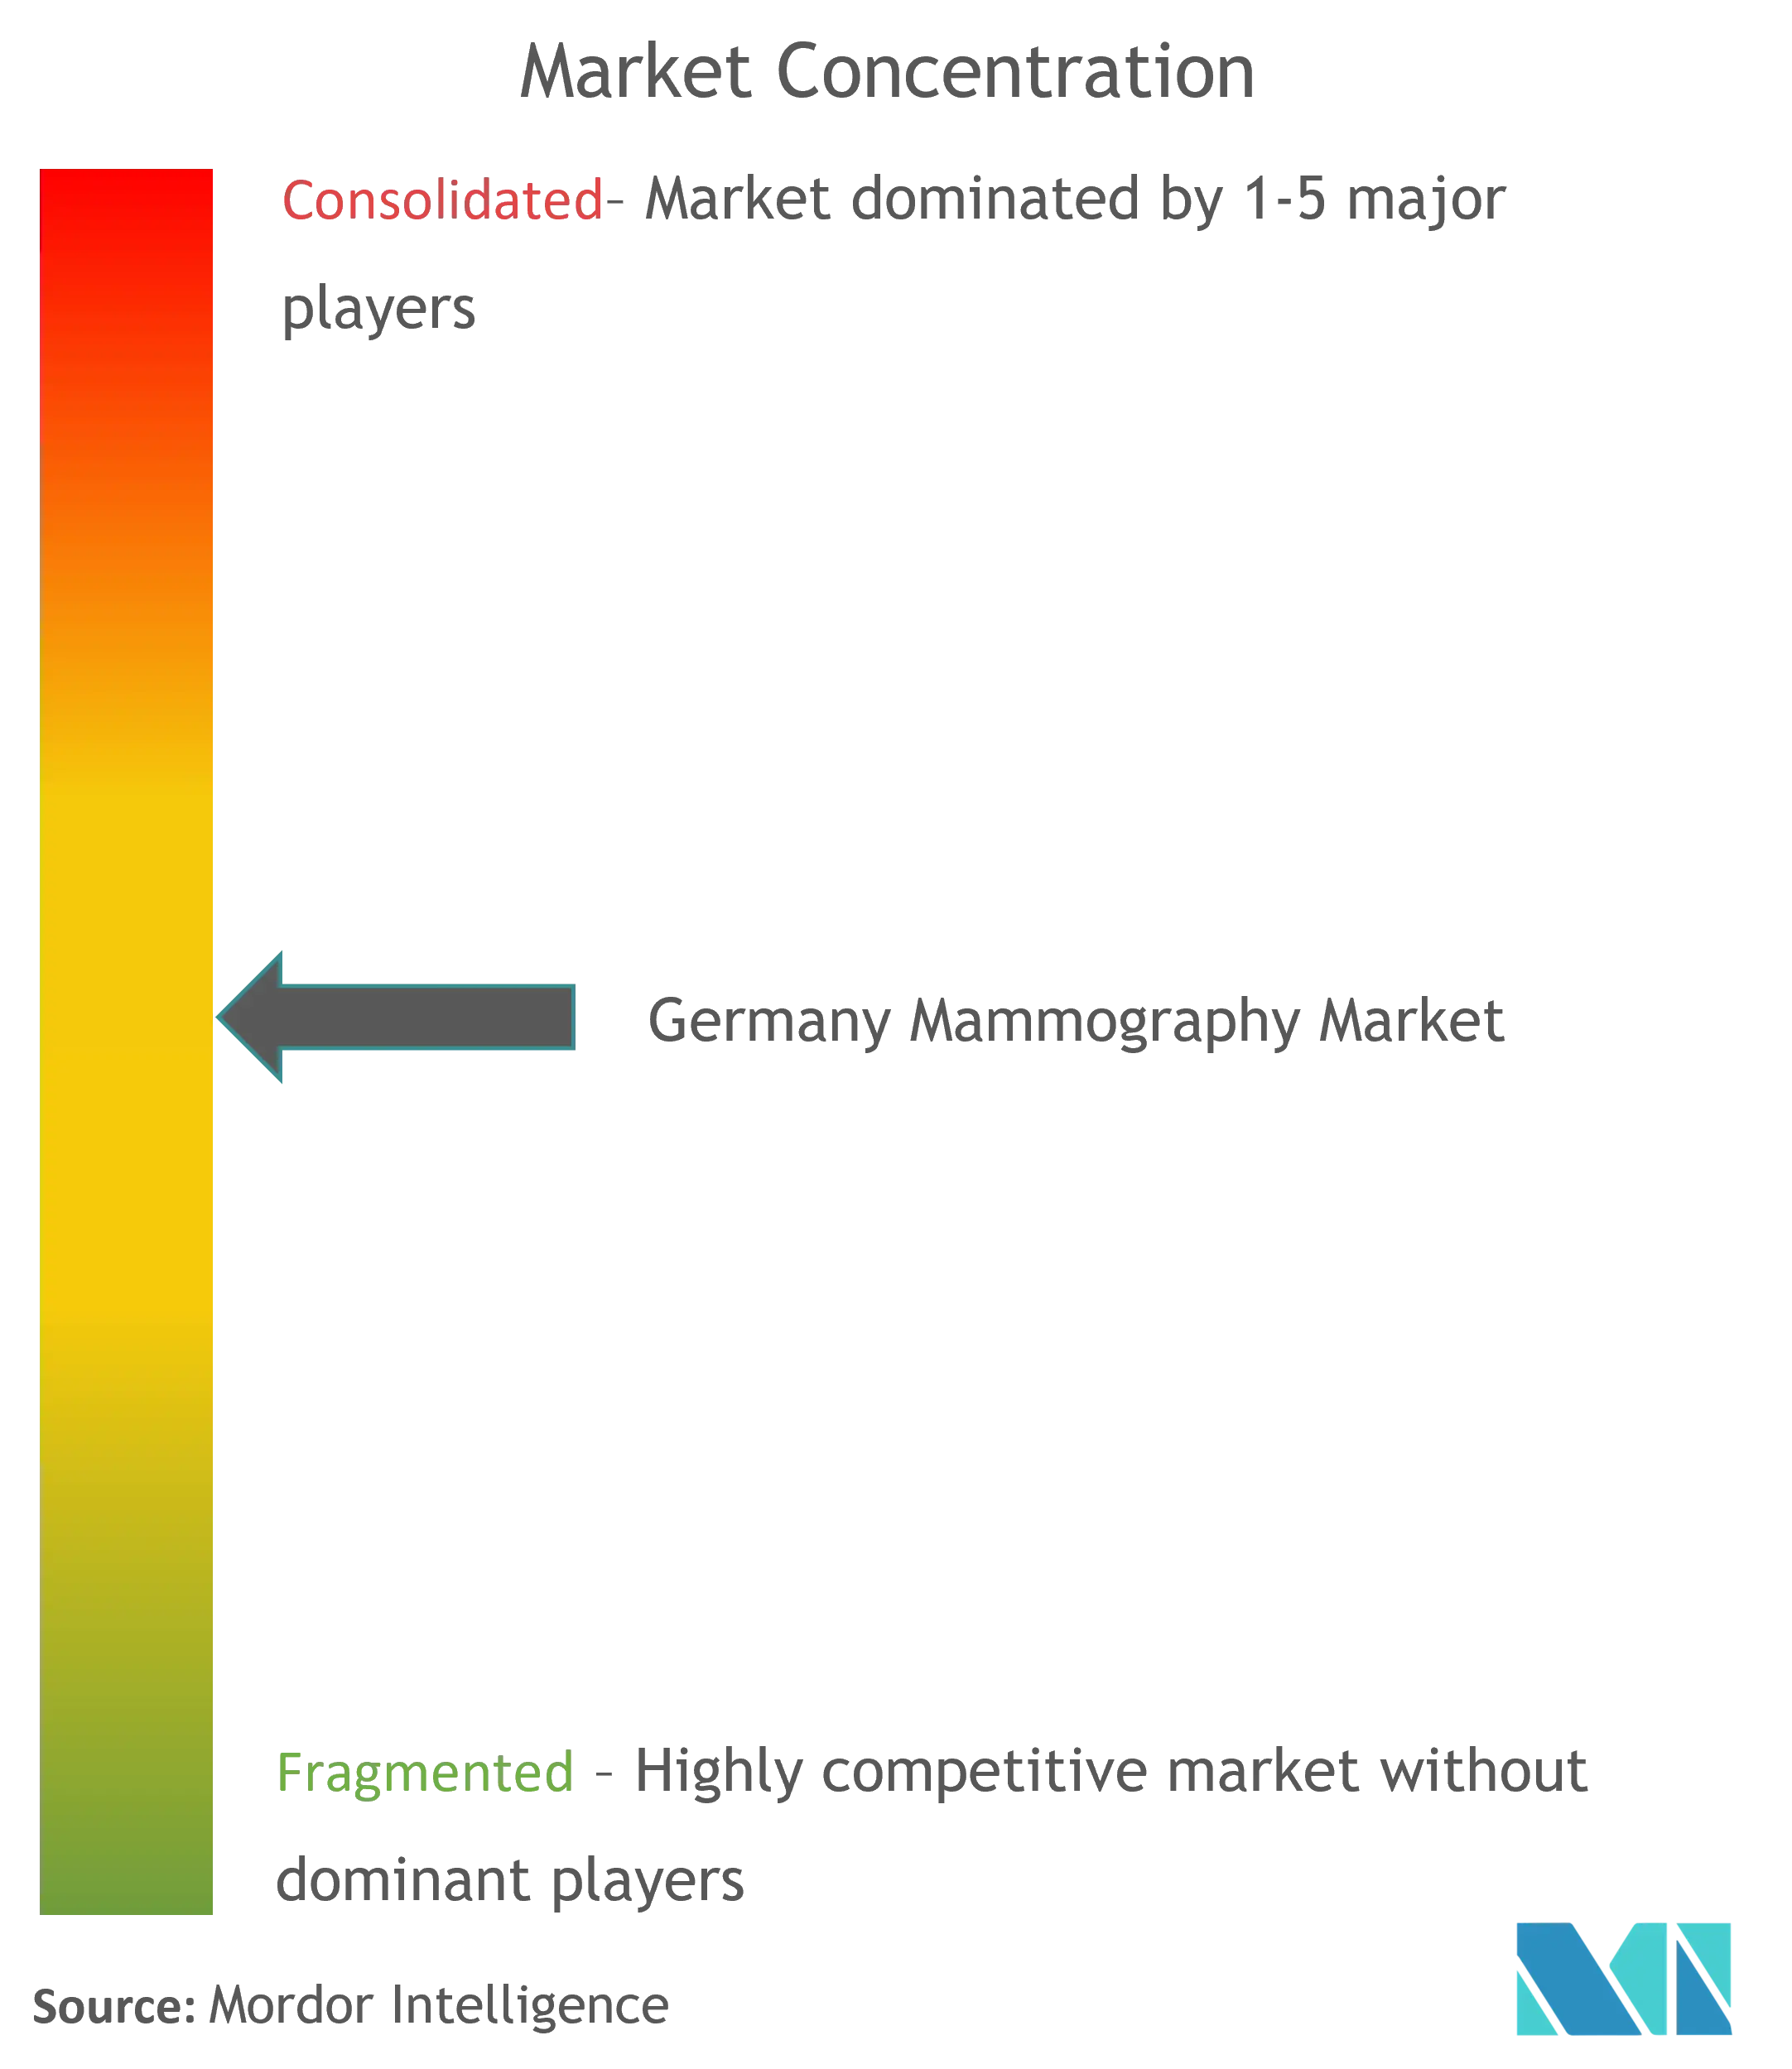 Germany Mammography Market Concentration